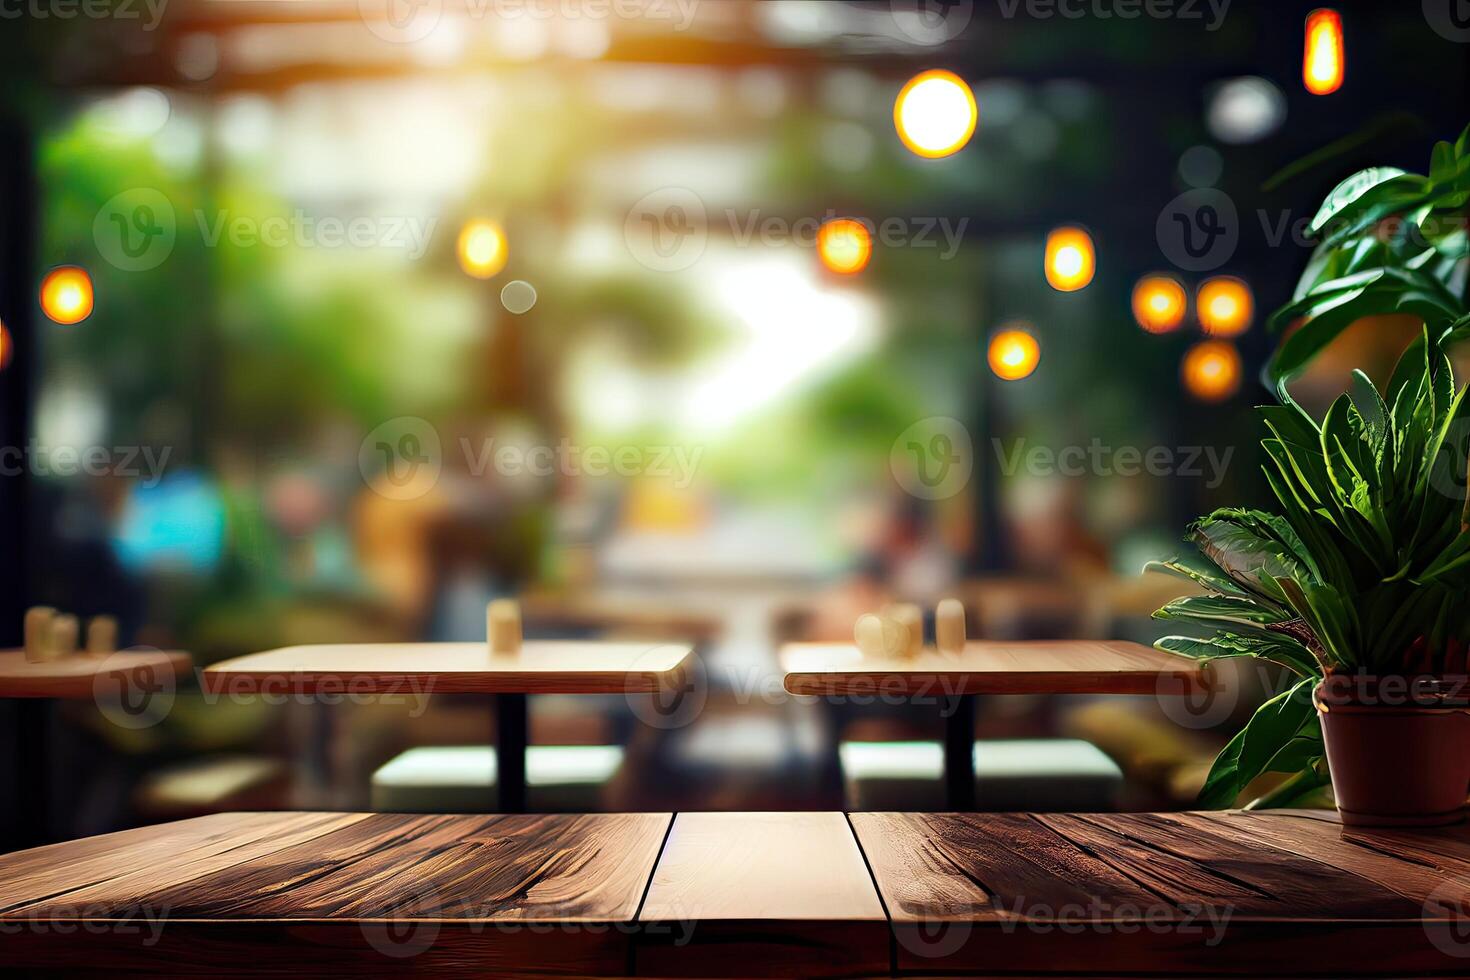 image of wooden table in front of abstract blurred background of resturant lights. Wood table top on blur of lighting in night cafe,restaurant background. selective focus. photo